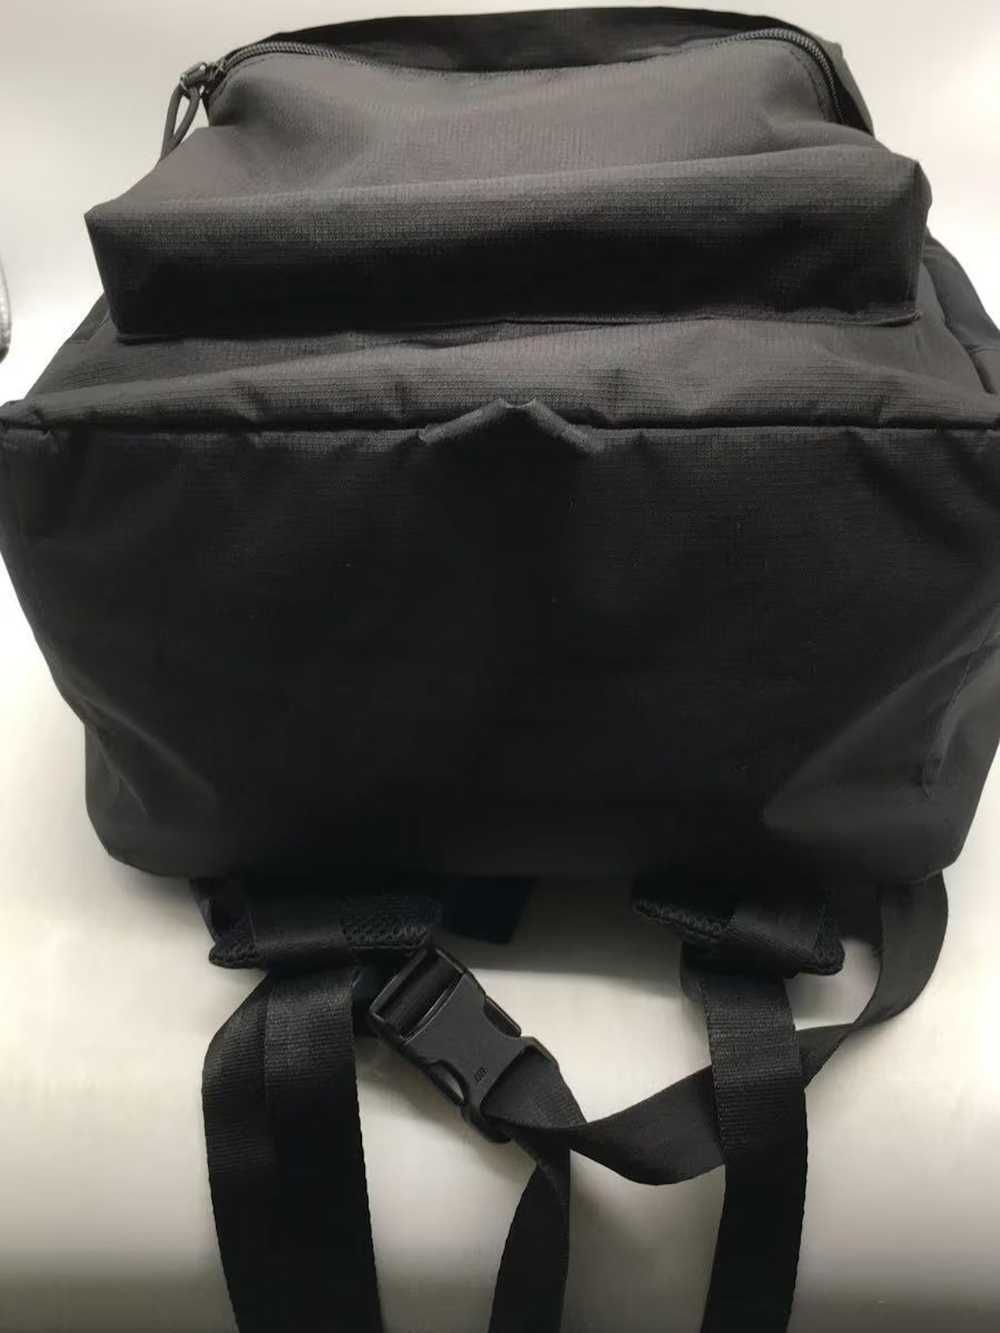 Undercover Undercover Maniac Nylon Backpack - image 4